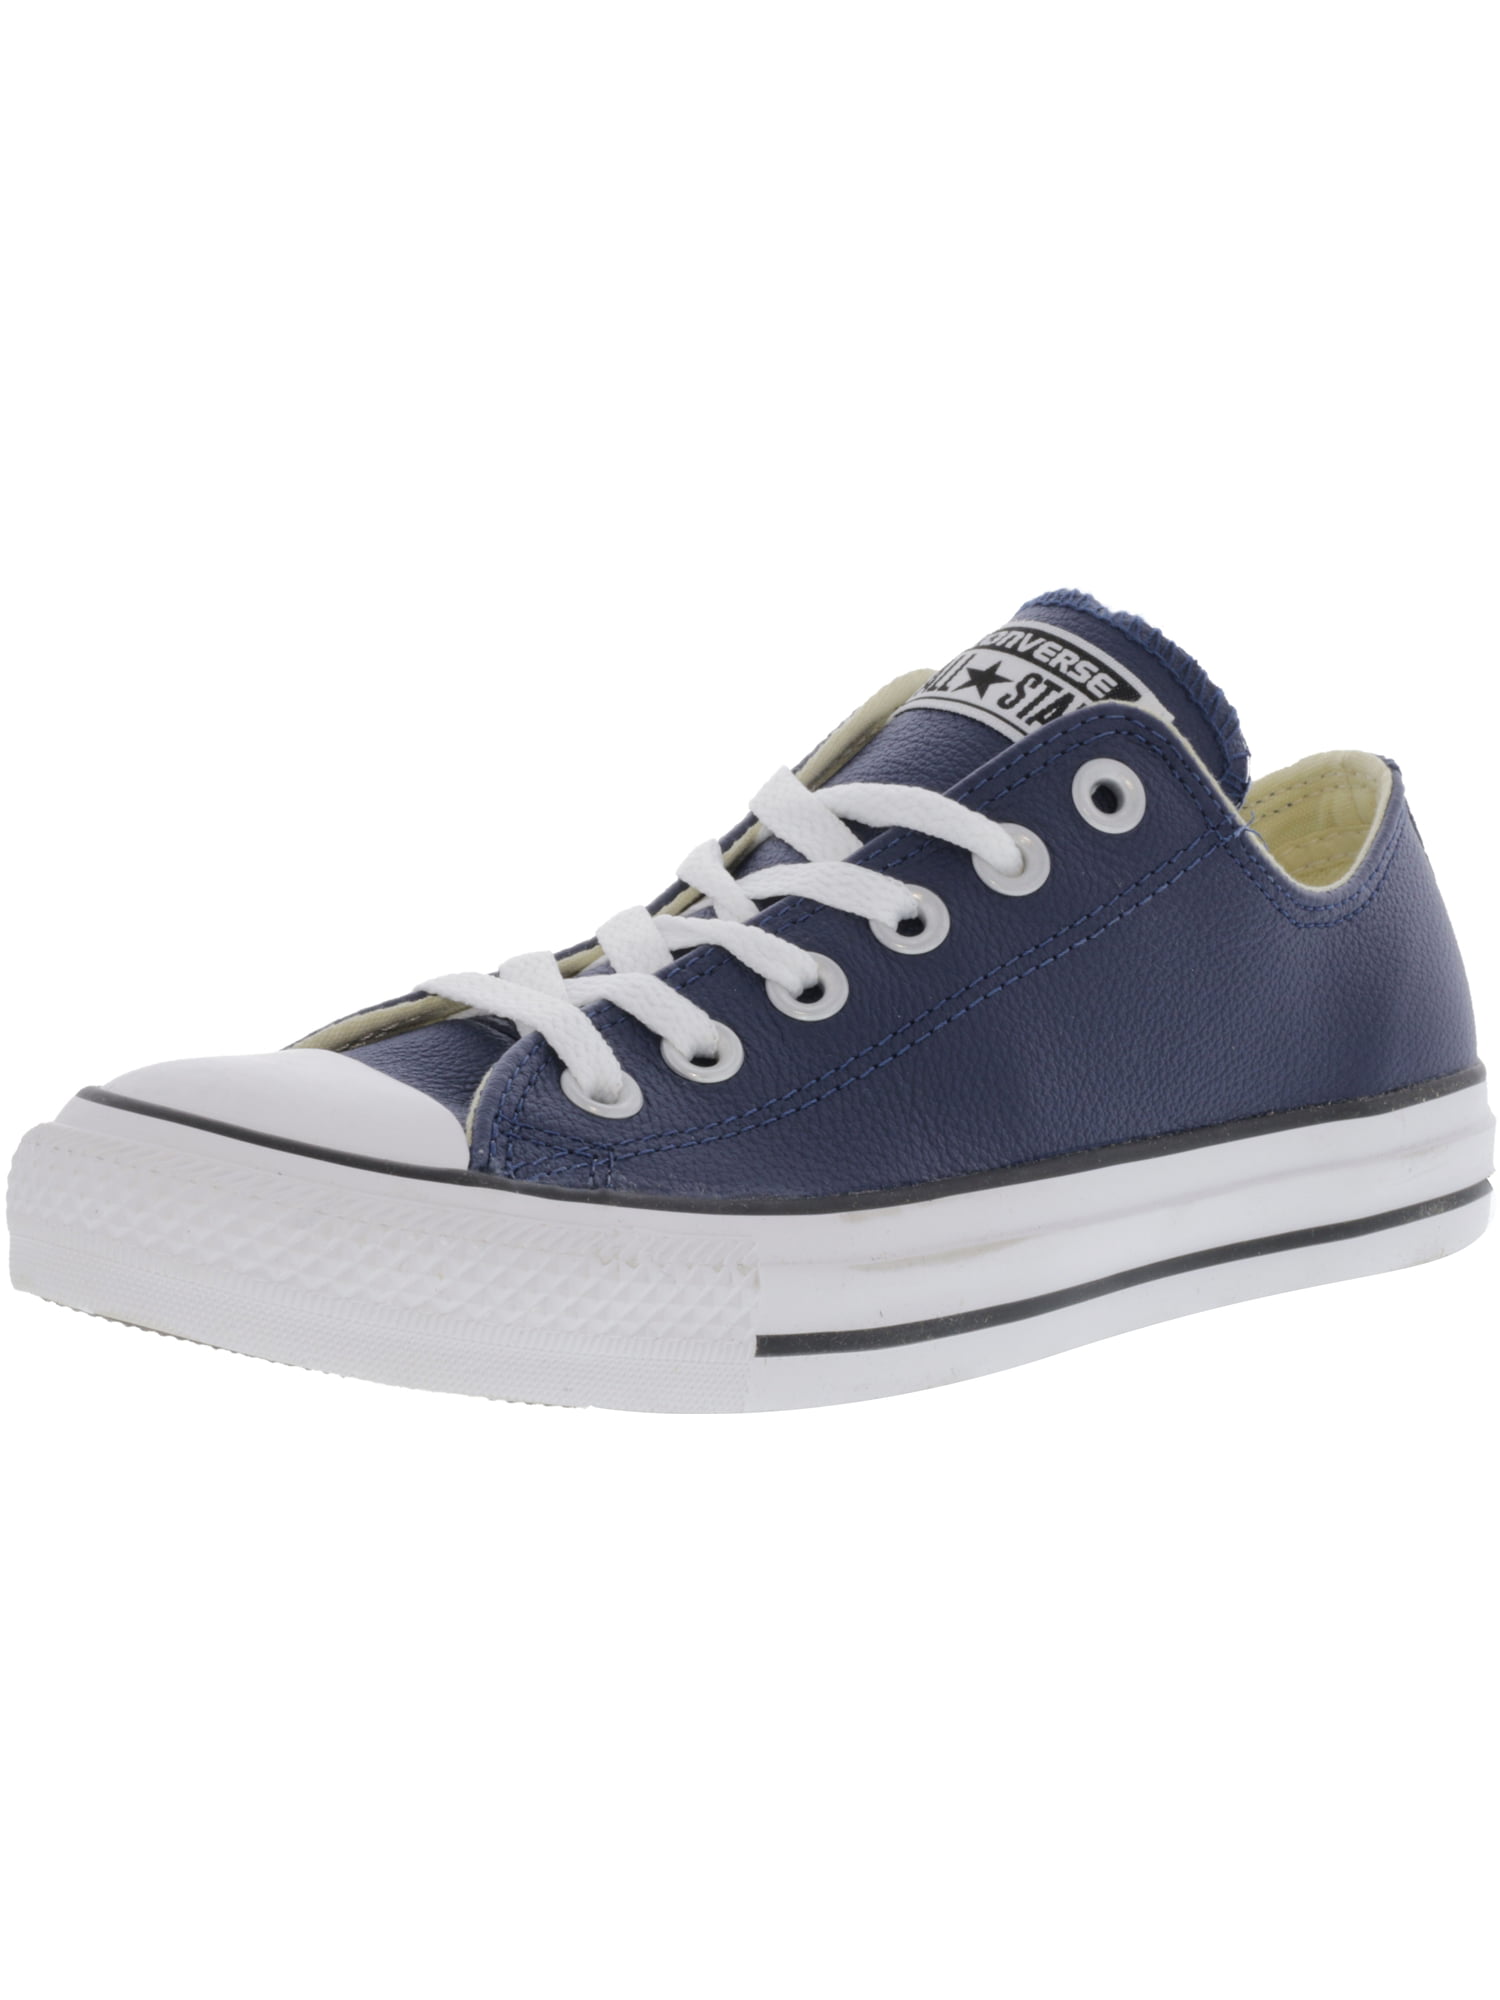 converse chuck taylor all star fashion leather ox